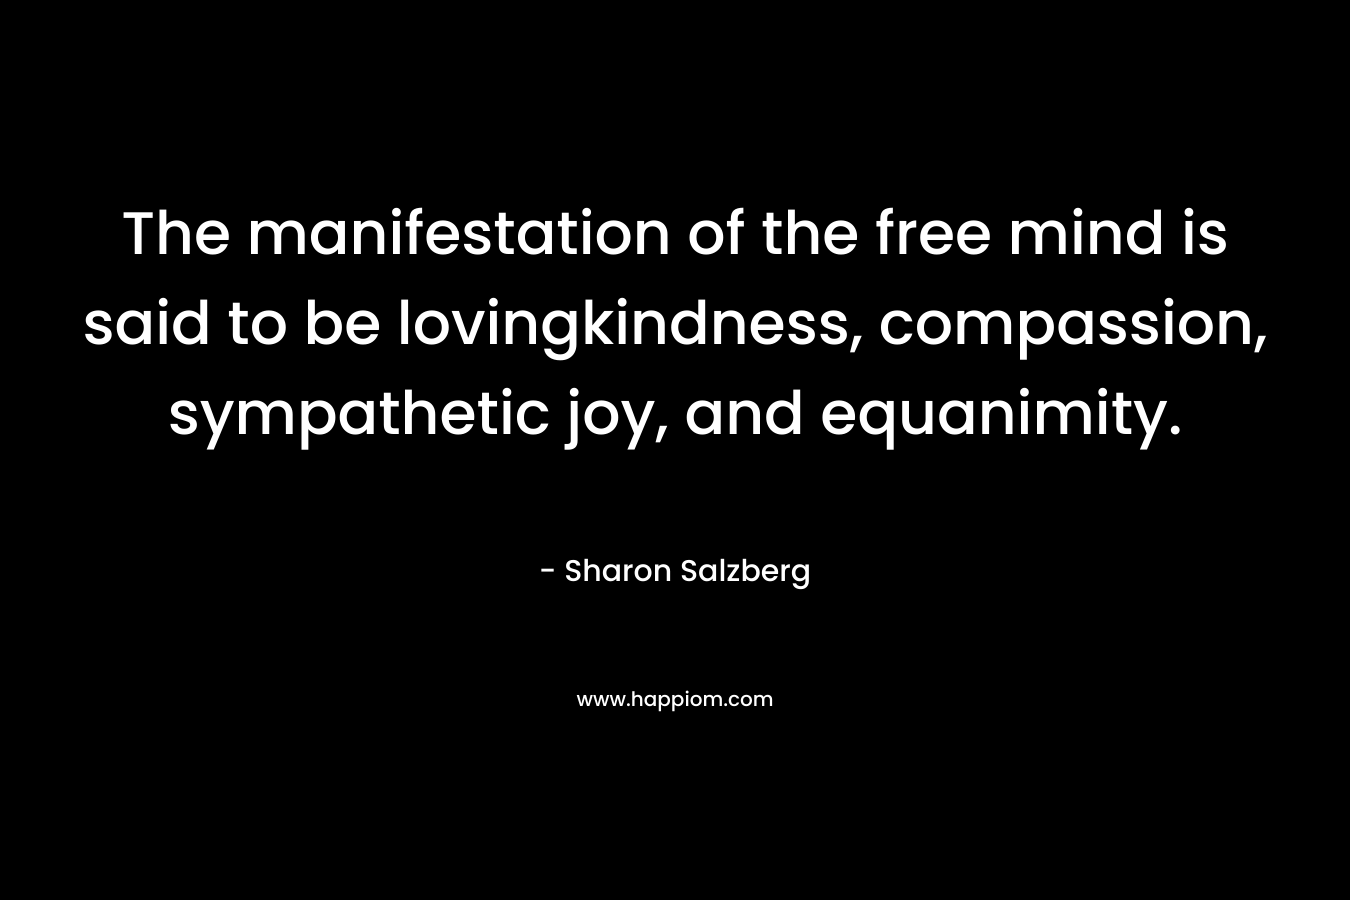 The manifestation of the free mind is said to be lovingkindness, compassion, sympathetic joy, and equanimity. – Sharon Salzberg